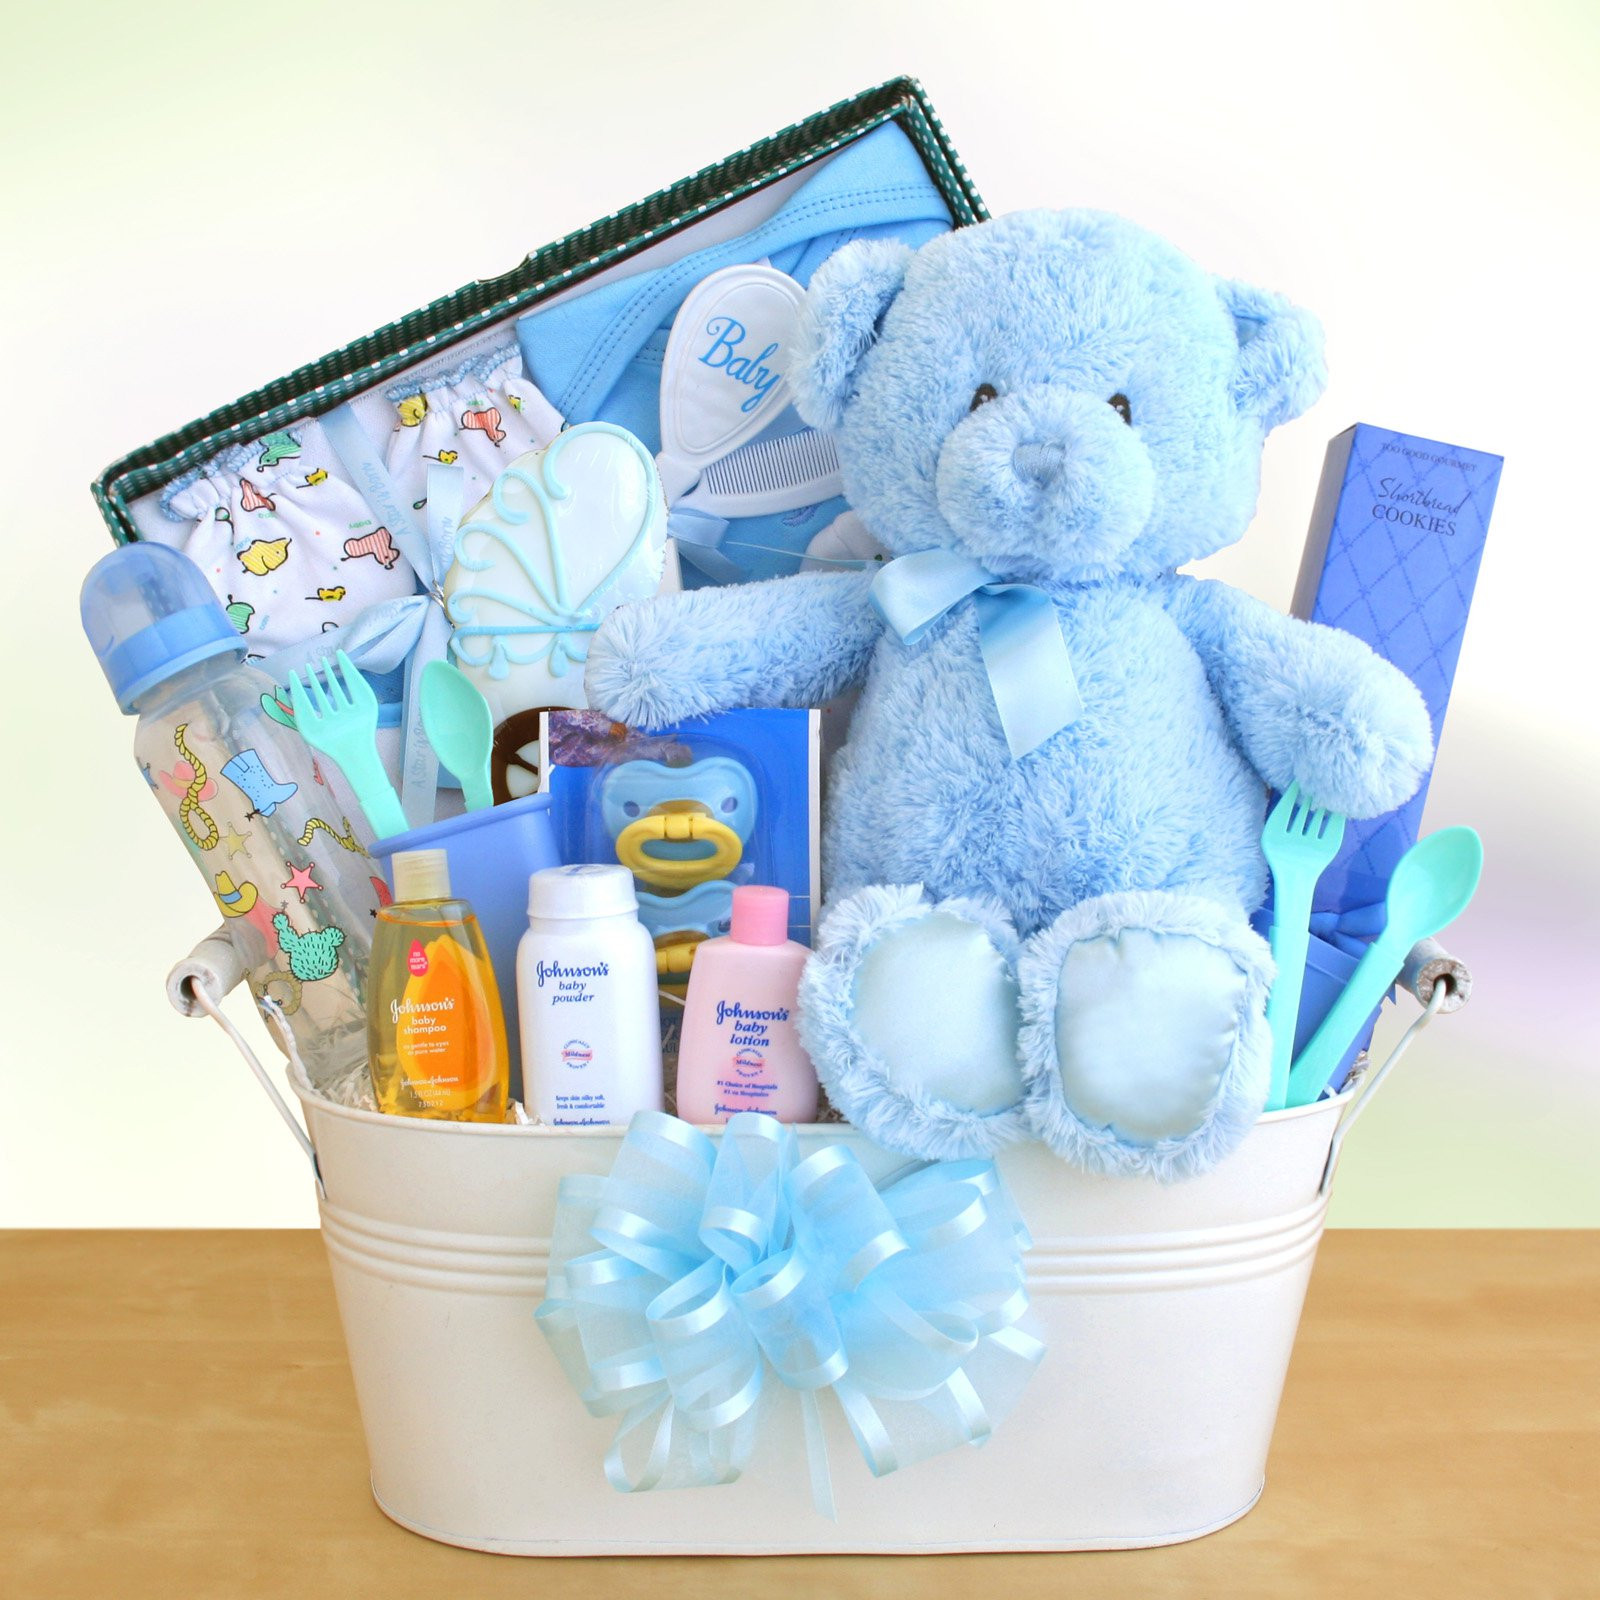 Baby Shower Gift Ideas For A Boy
 New Arrival Baby Boy Gift Basket Gift Baskets by